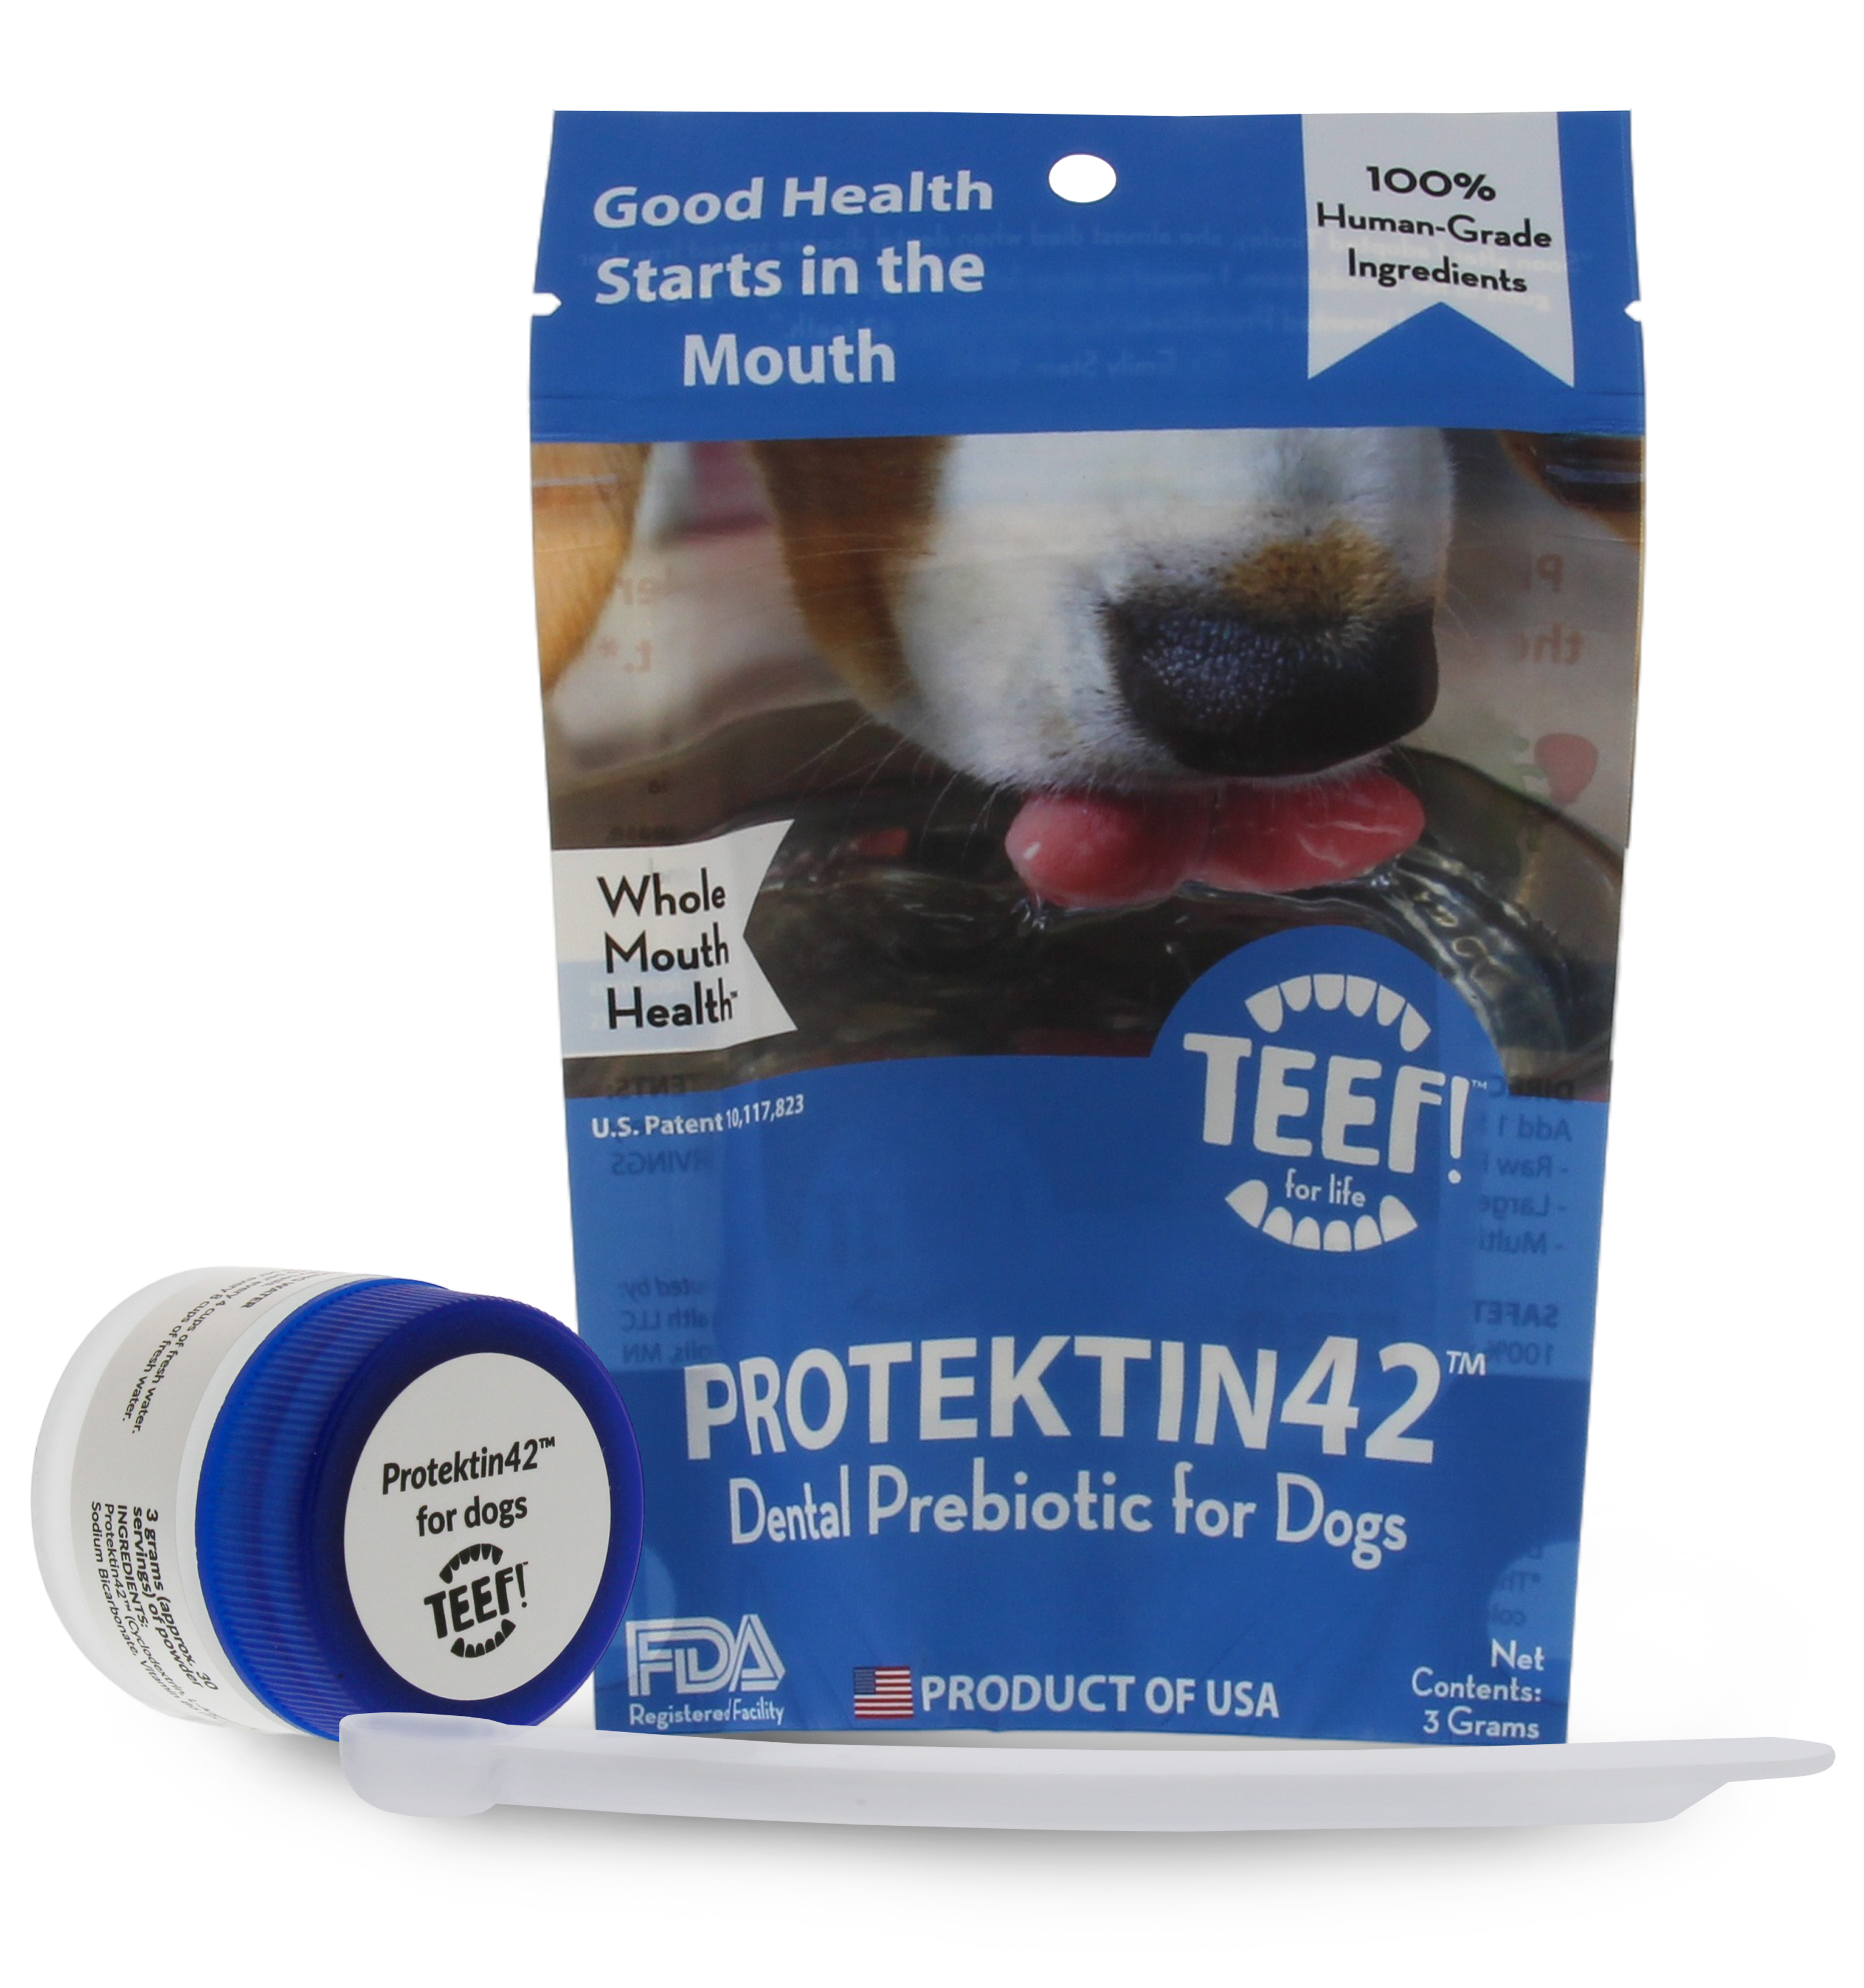 TEEF Daily Dental Care - Natural Dog Dental Water Additive, Fights Plaque and Tartar - No Brushing, Add to Water Bowl and Say Goodbye to Bad Dog Breath - Essential For Dog Gum Disease Treatment - image 1 of 9